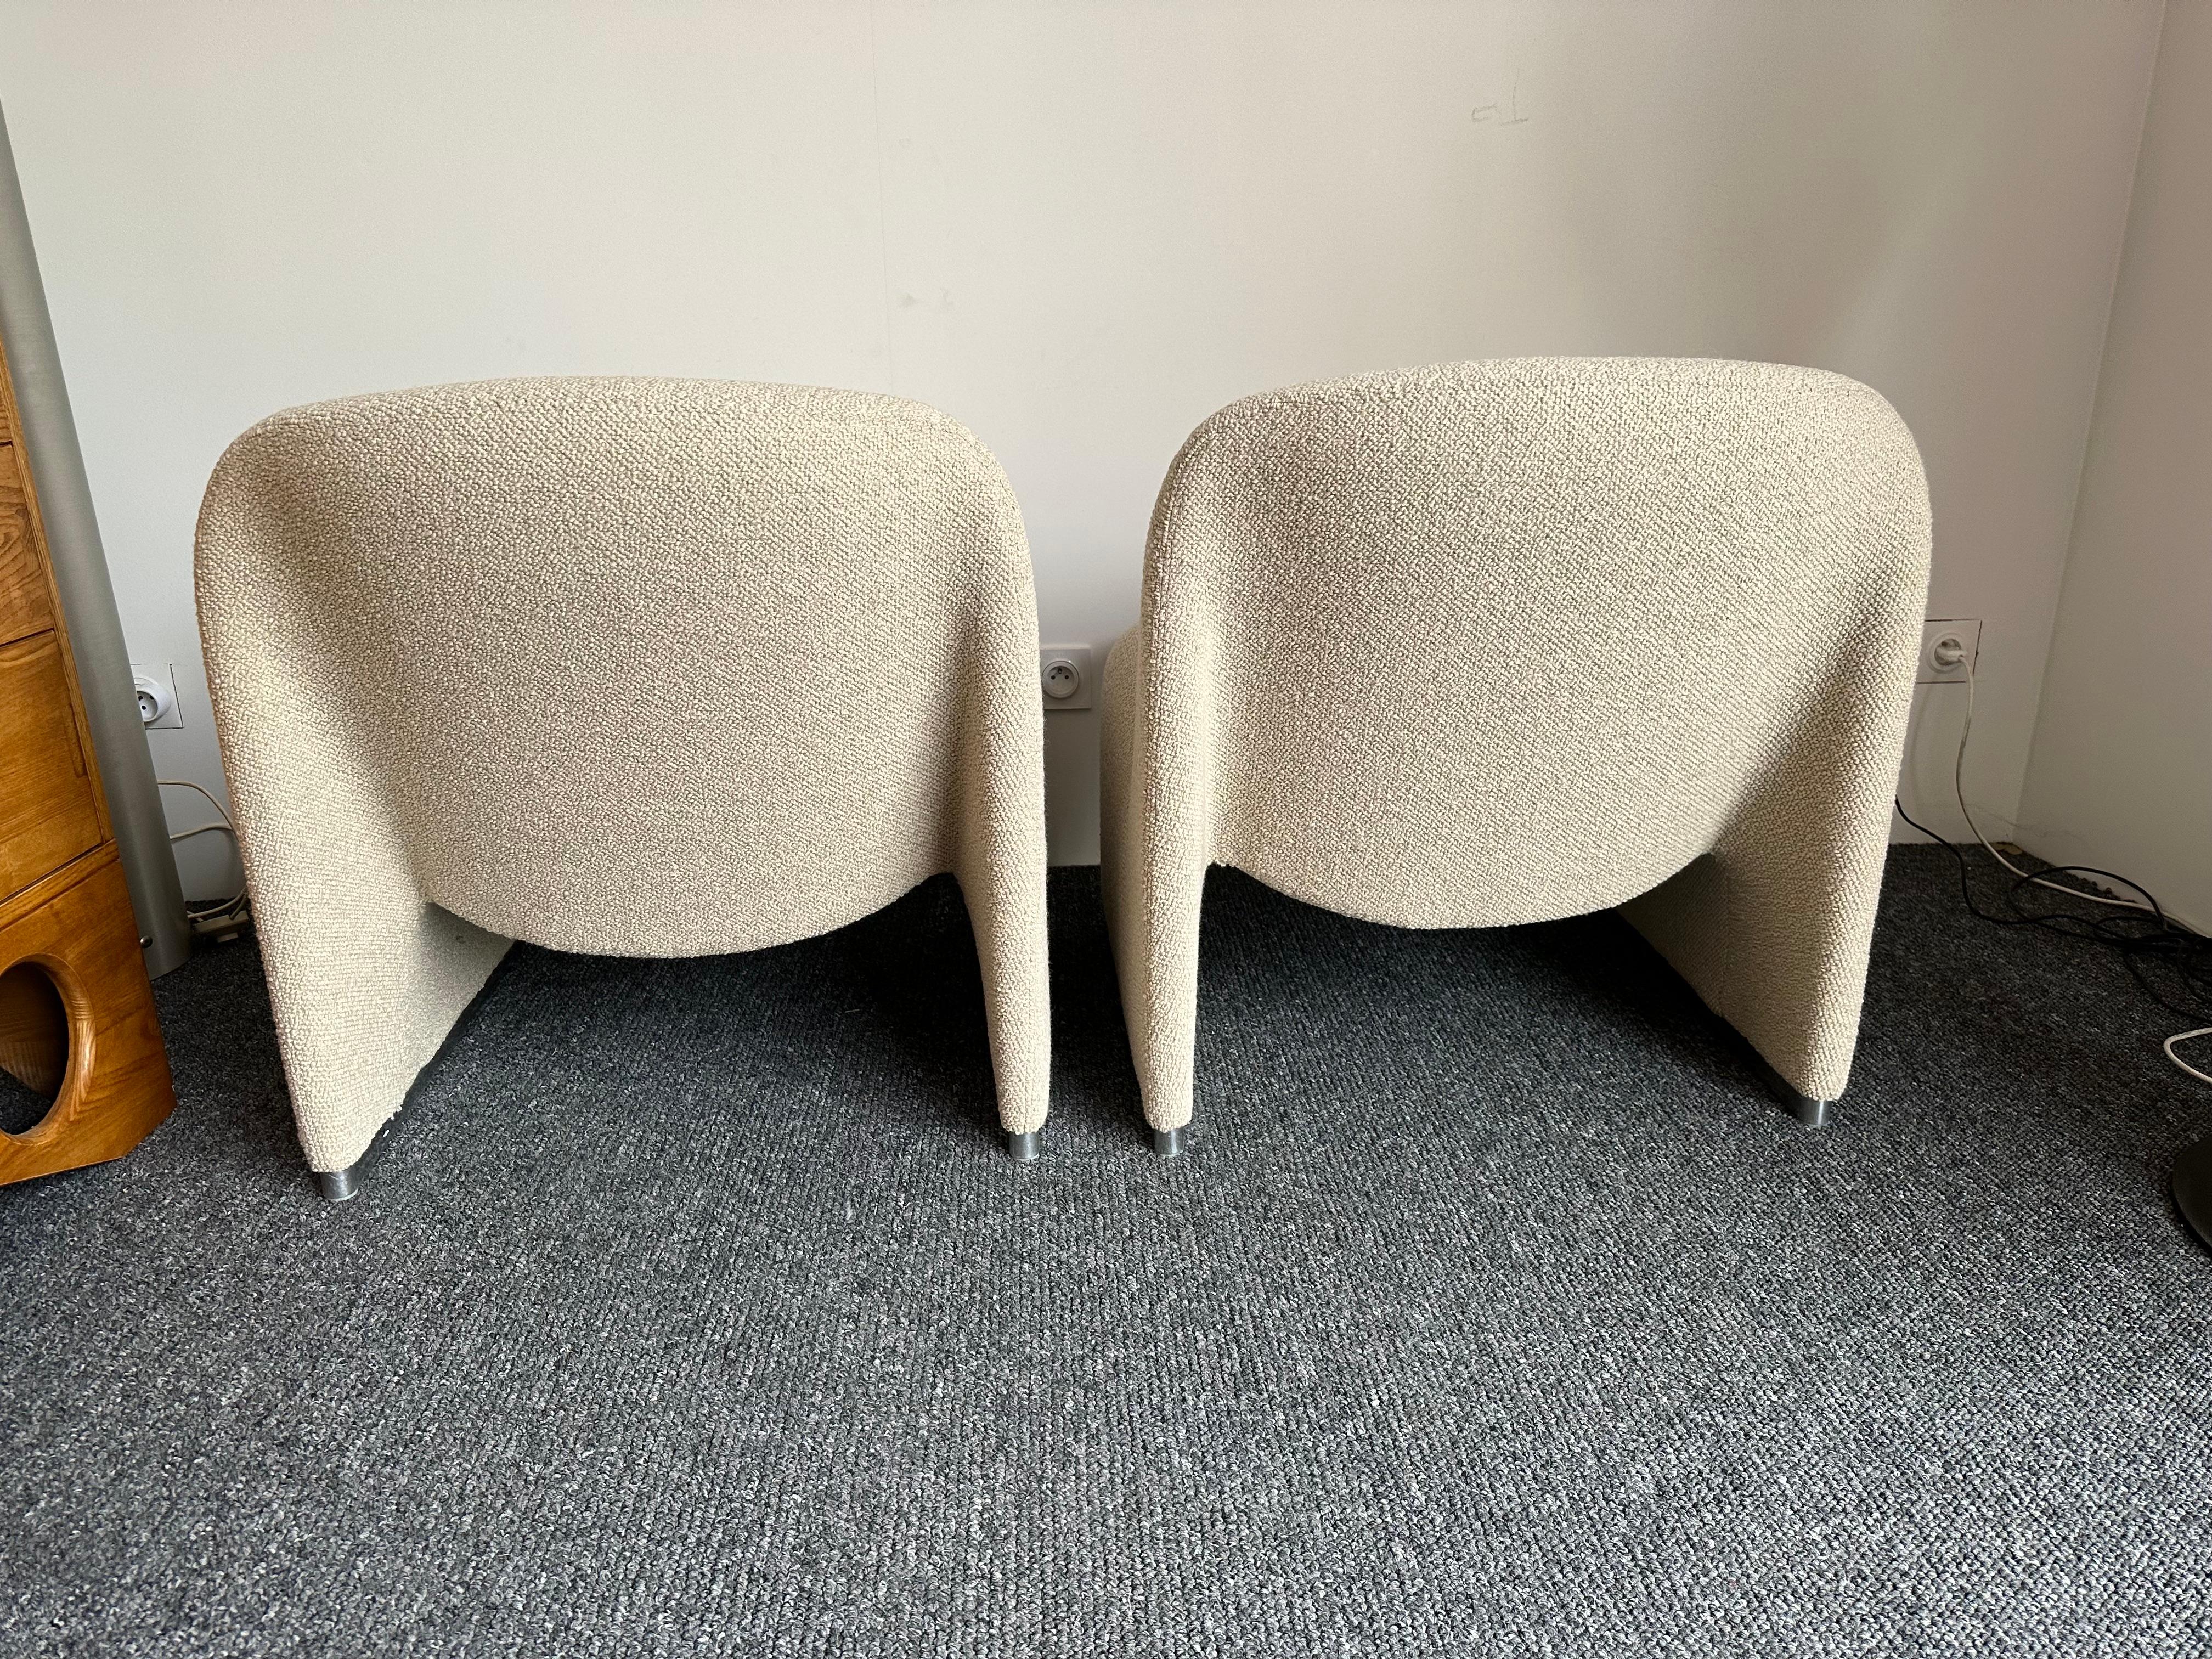 Late 20th Century Pair of Slipper Chairs Alky Bouclé Fabric by Giancarlo Piretti, Italy, 1969